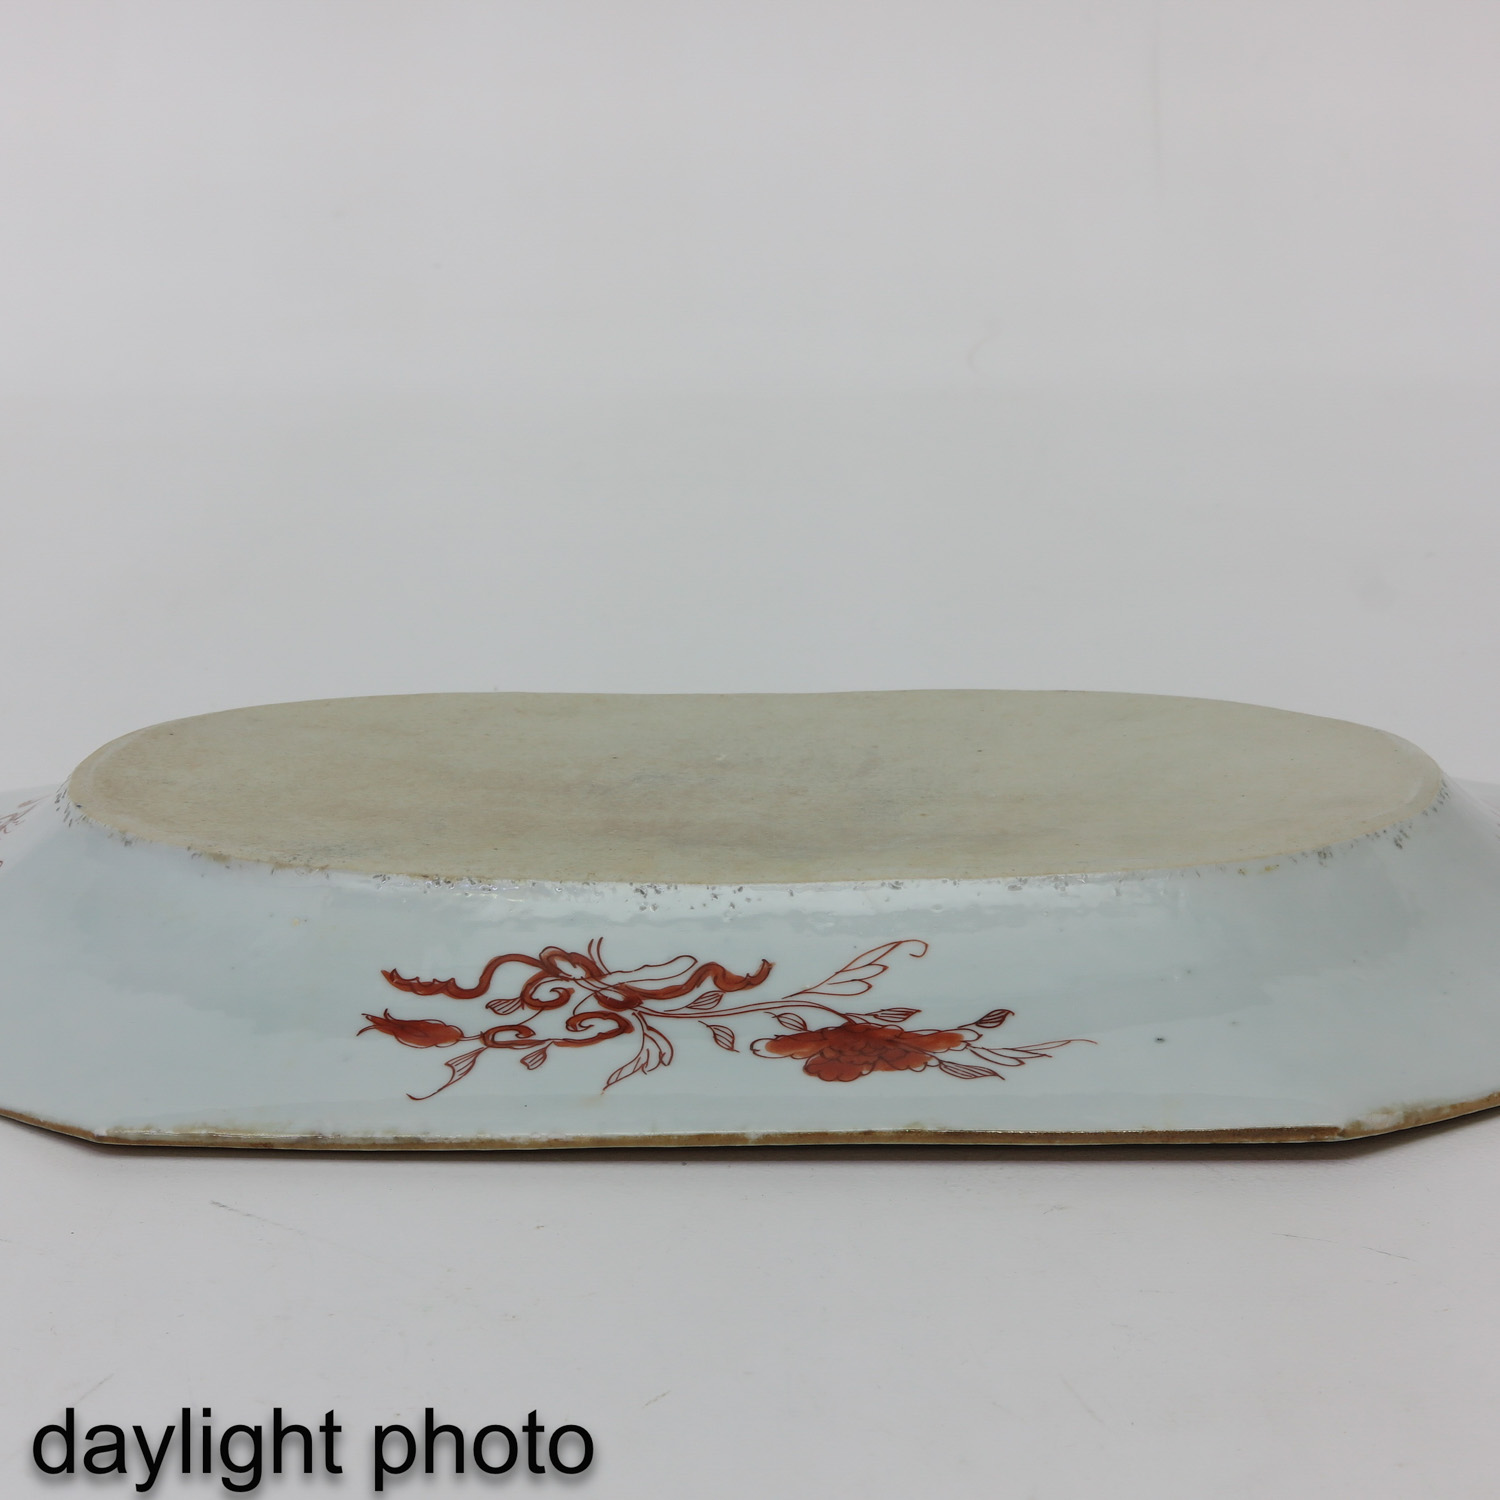 A Polychrome Decor Serving Tray - Image 6 of 7